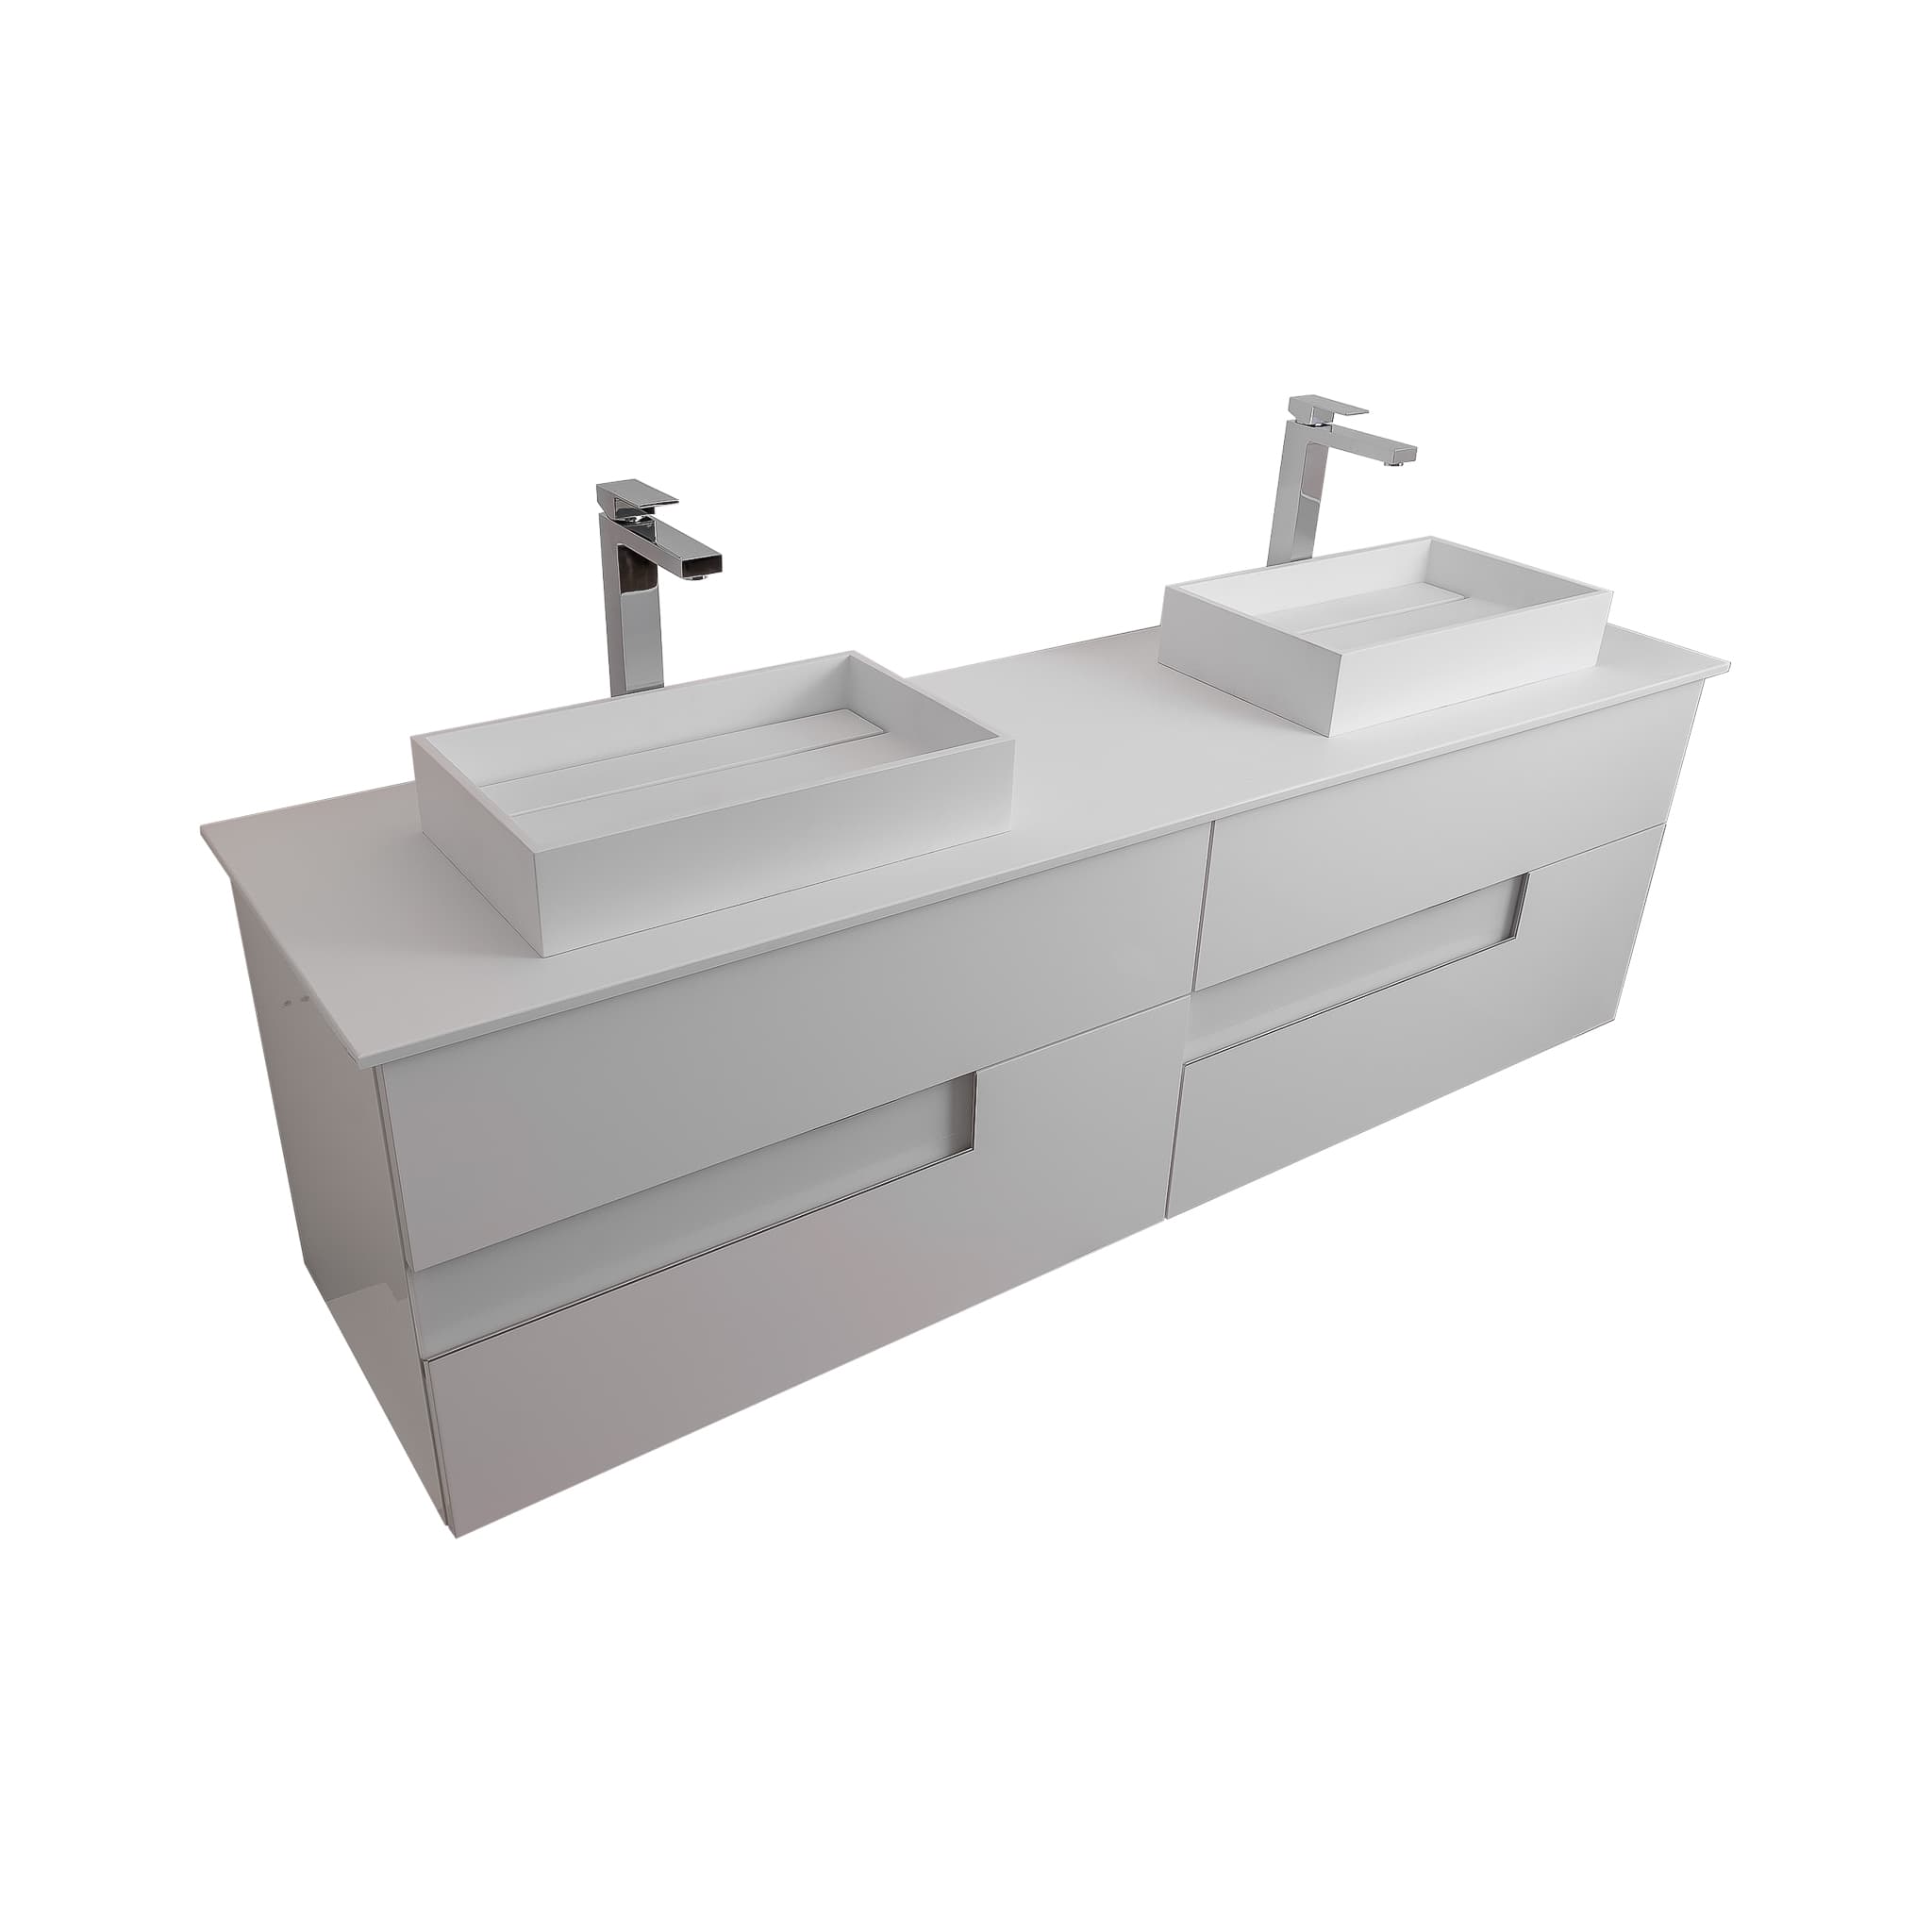 Vision 72 White High Gloss Cabinet, Solid Surface Flat White Counter And Two Infinity Square Solid Surface White Basin 1329, Wall Mounted Modern Vanity Set